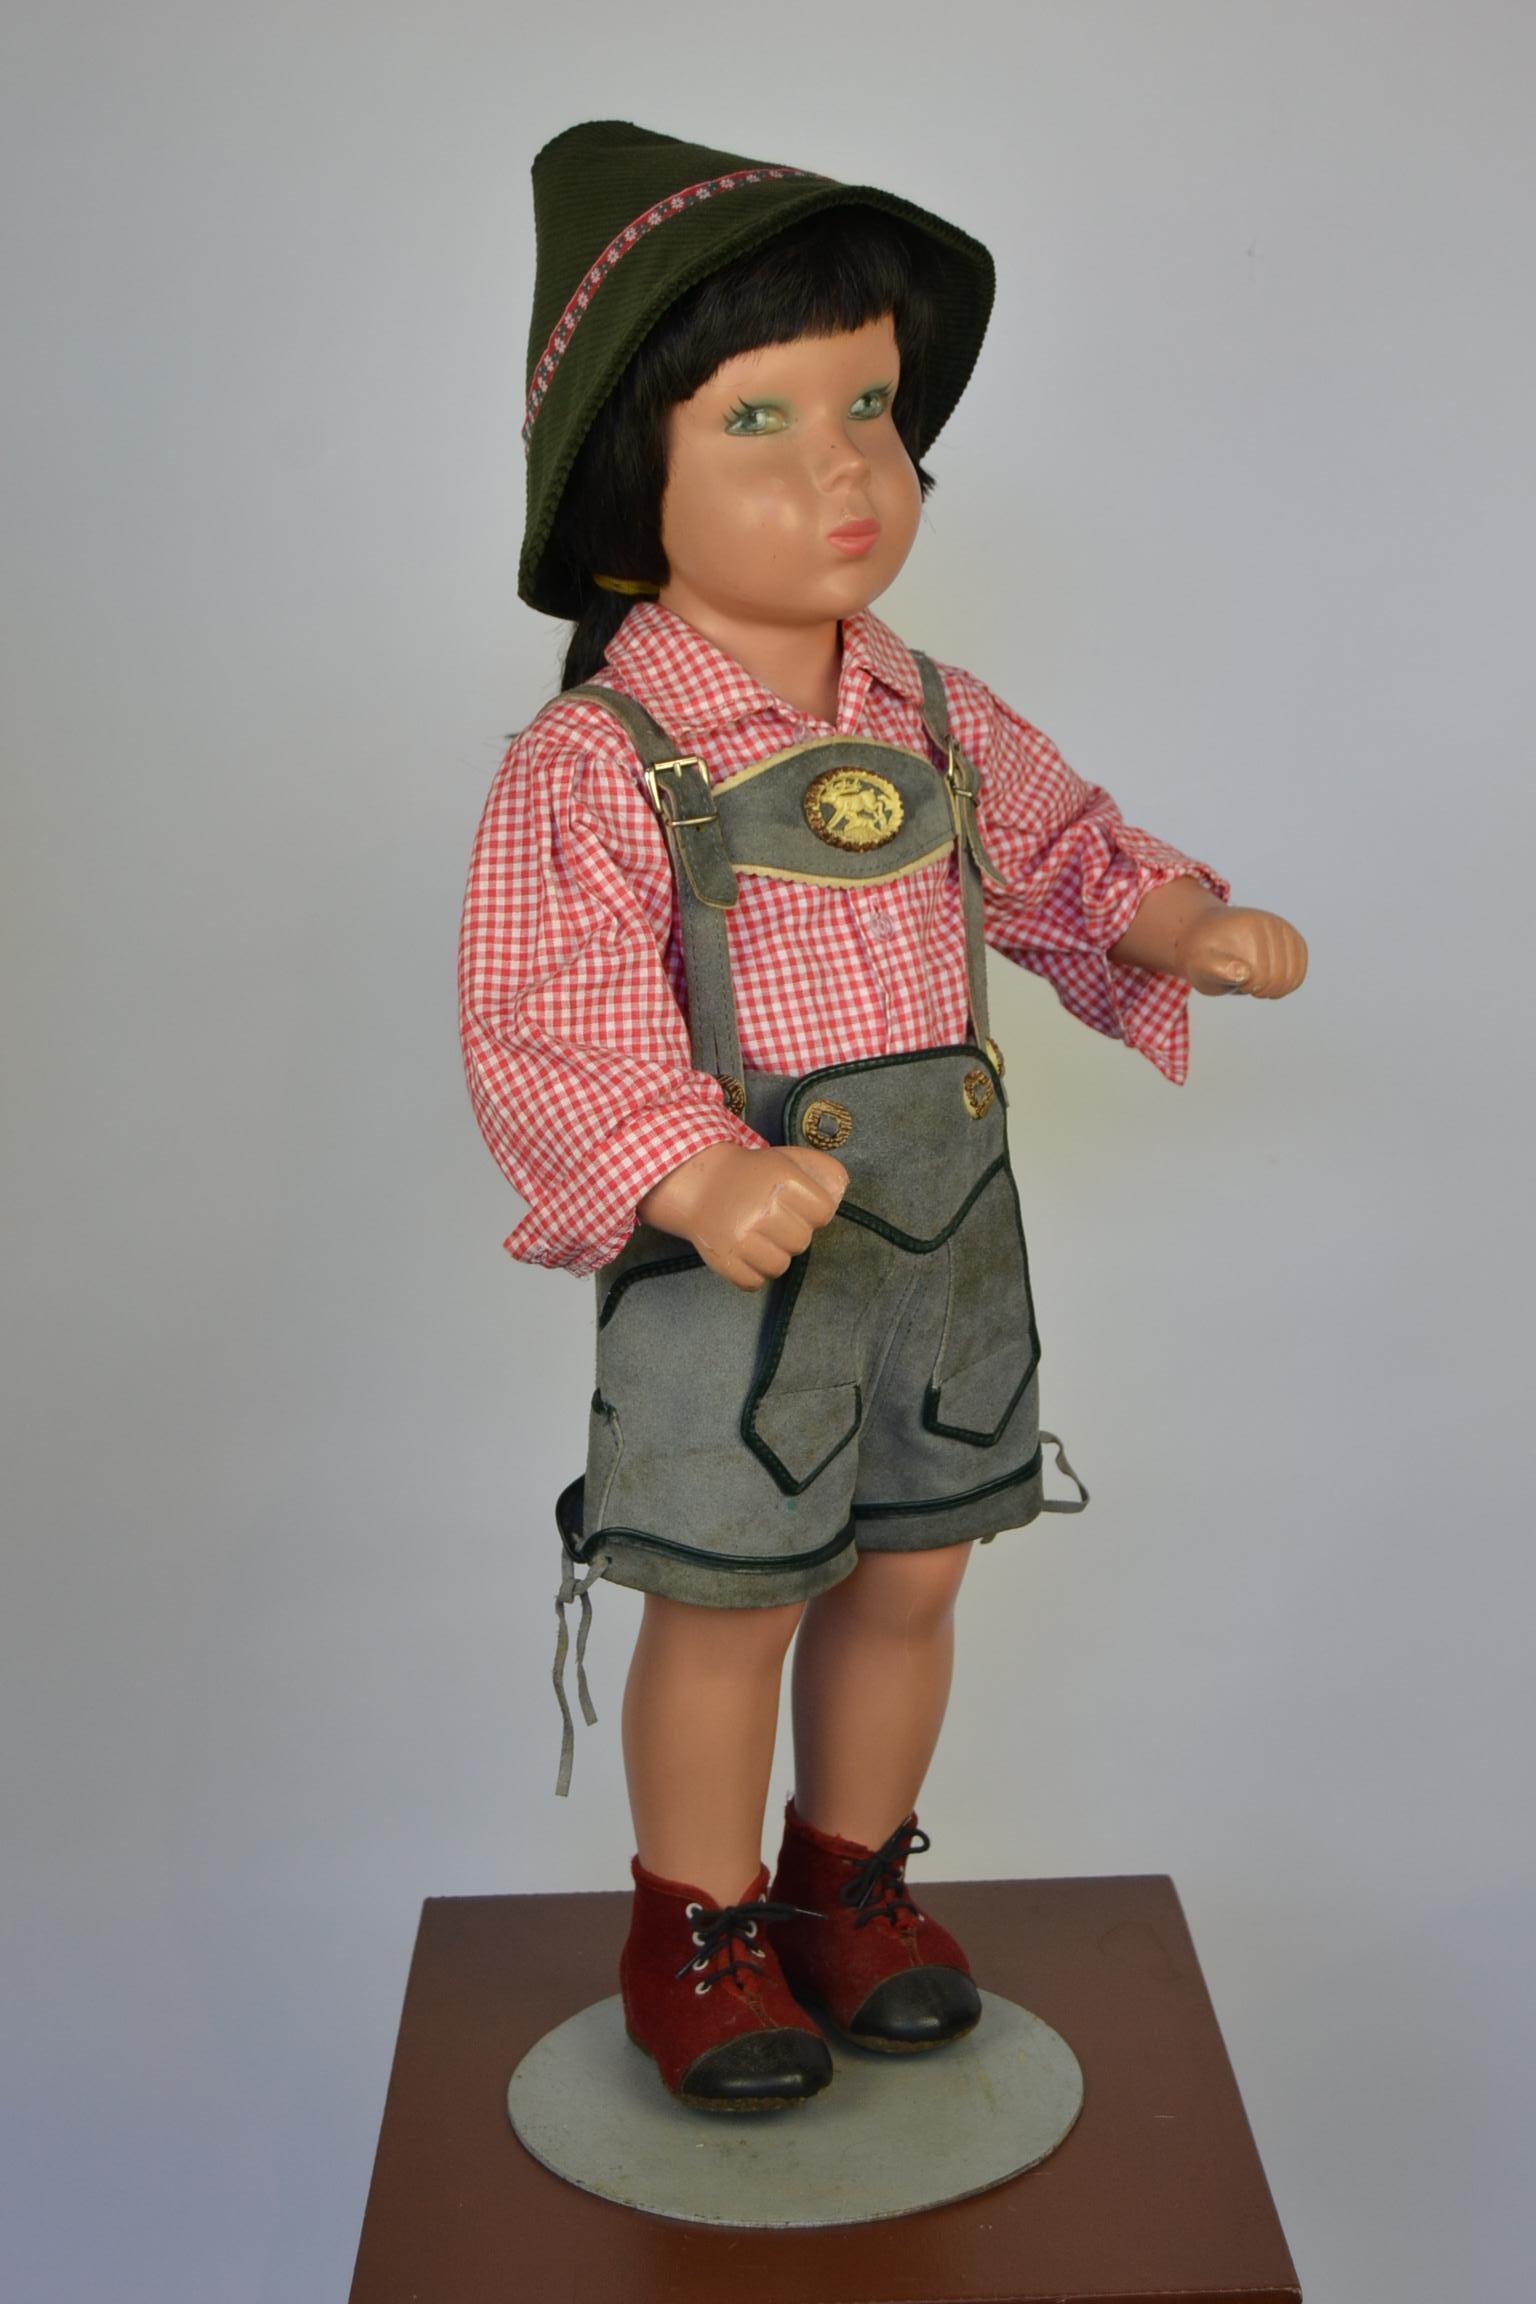 1950s Store Display Mannequin Child, Tyrol Clothing, Kathe Kruse Style 3